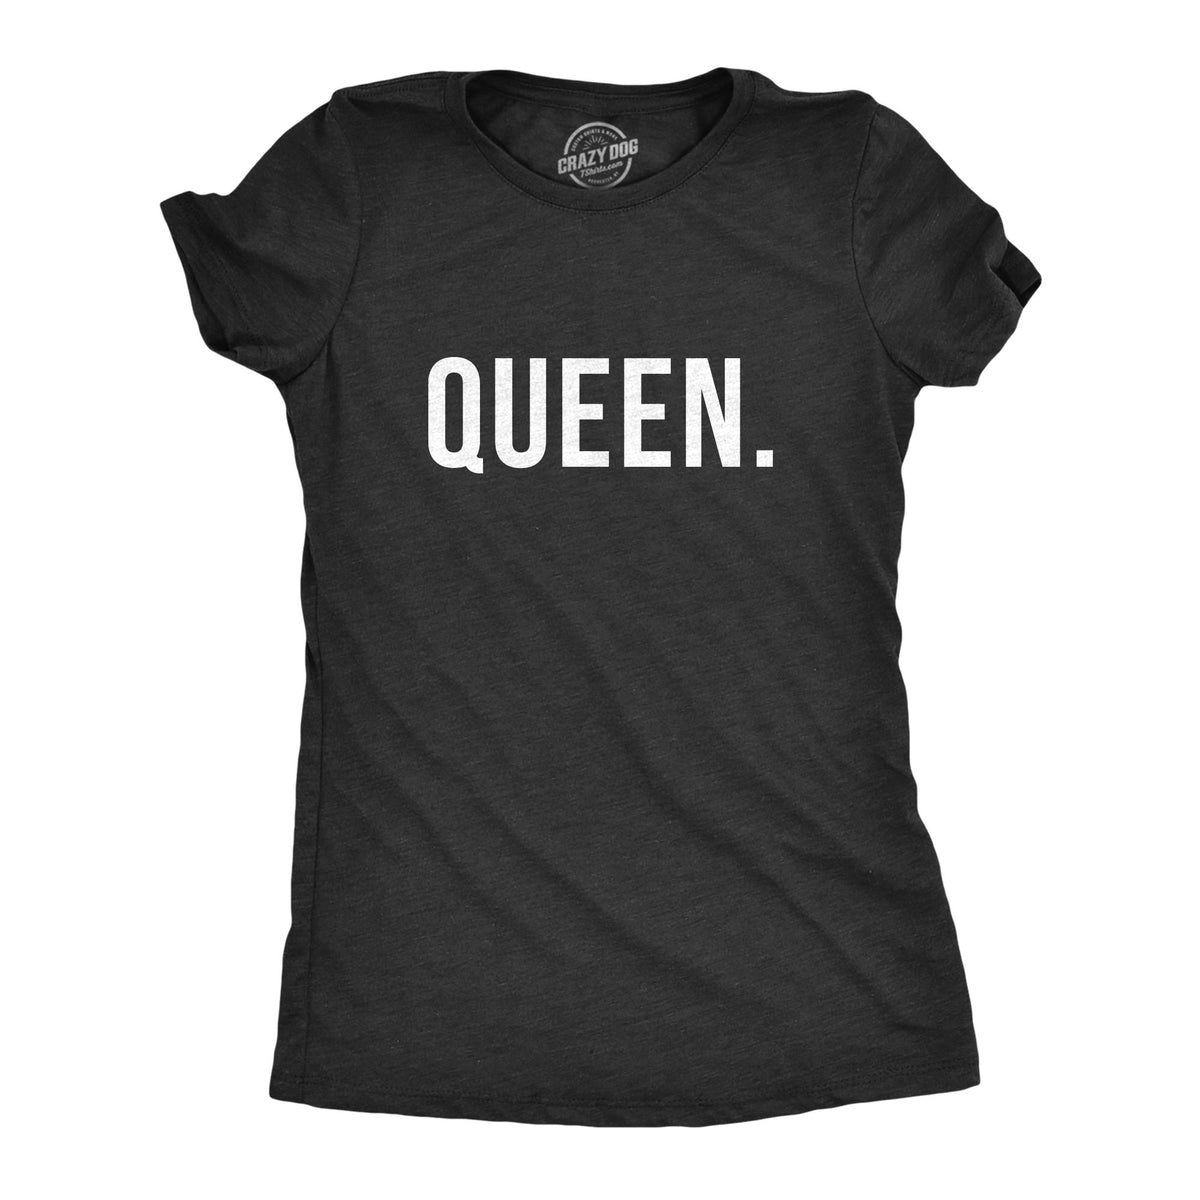 Funny Heather Black Queen. Womens T Shirt Nerdy Tee